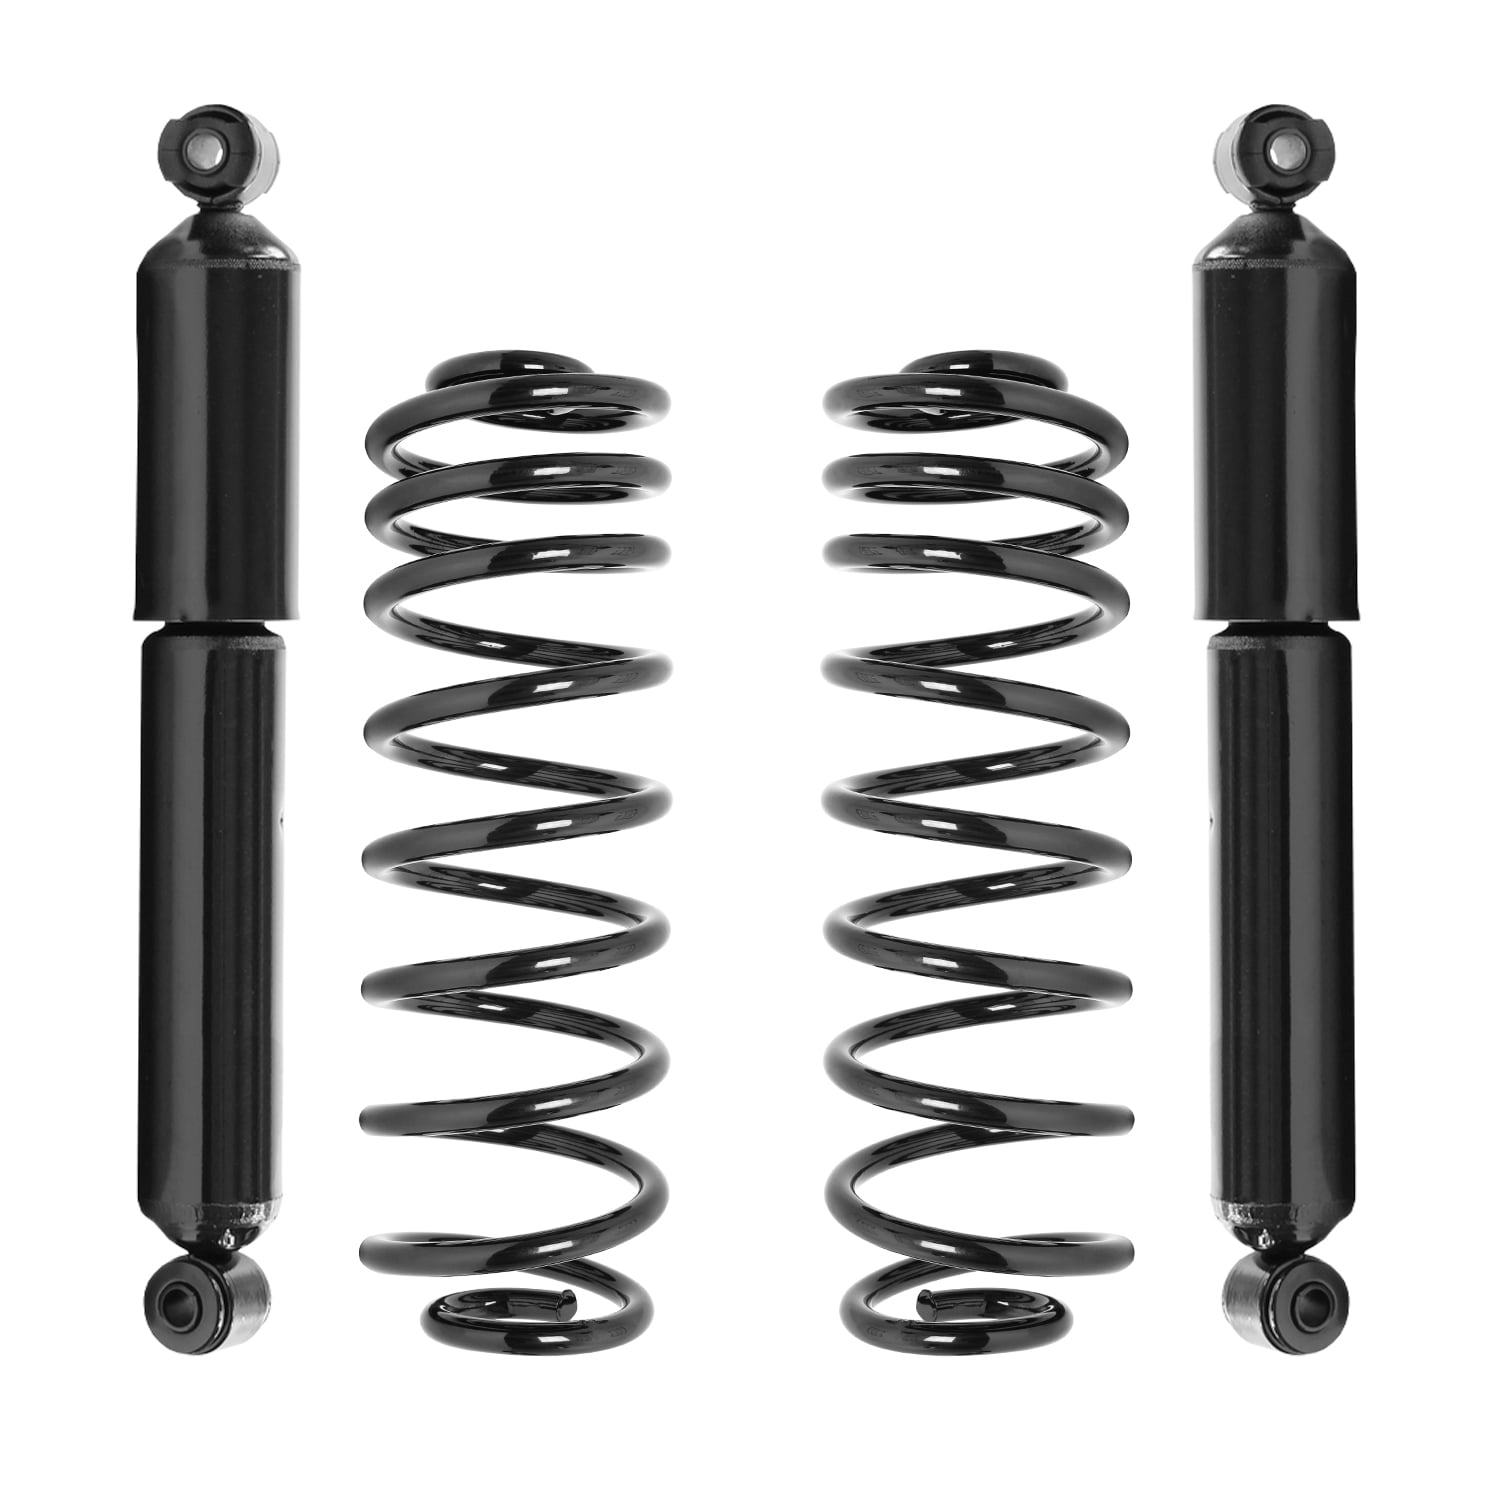 2 New Rear Shocks Fit 2003-1995 Ford Windstar with Warranty Free Shipping